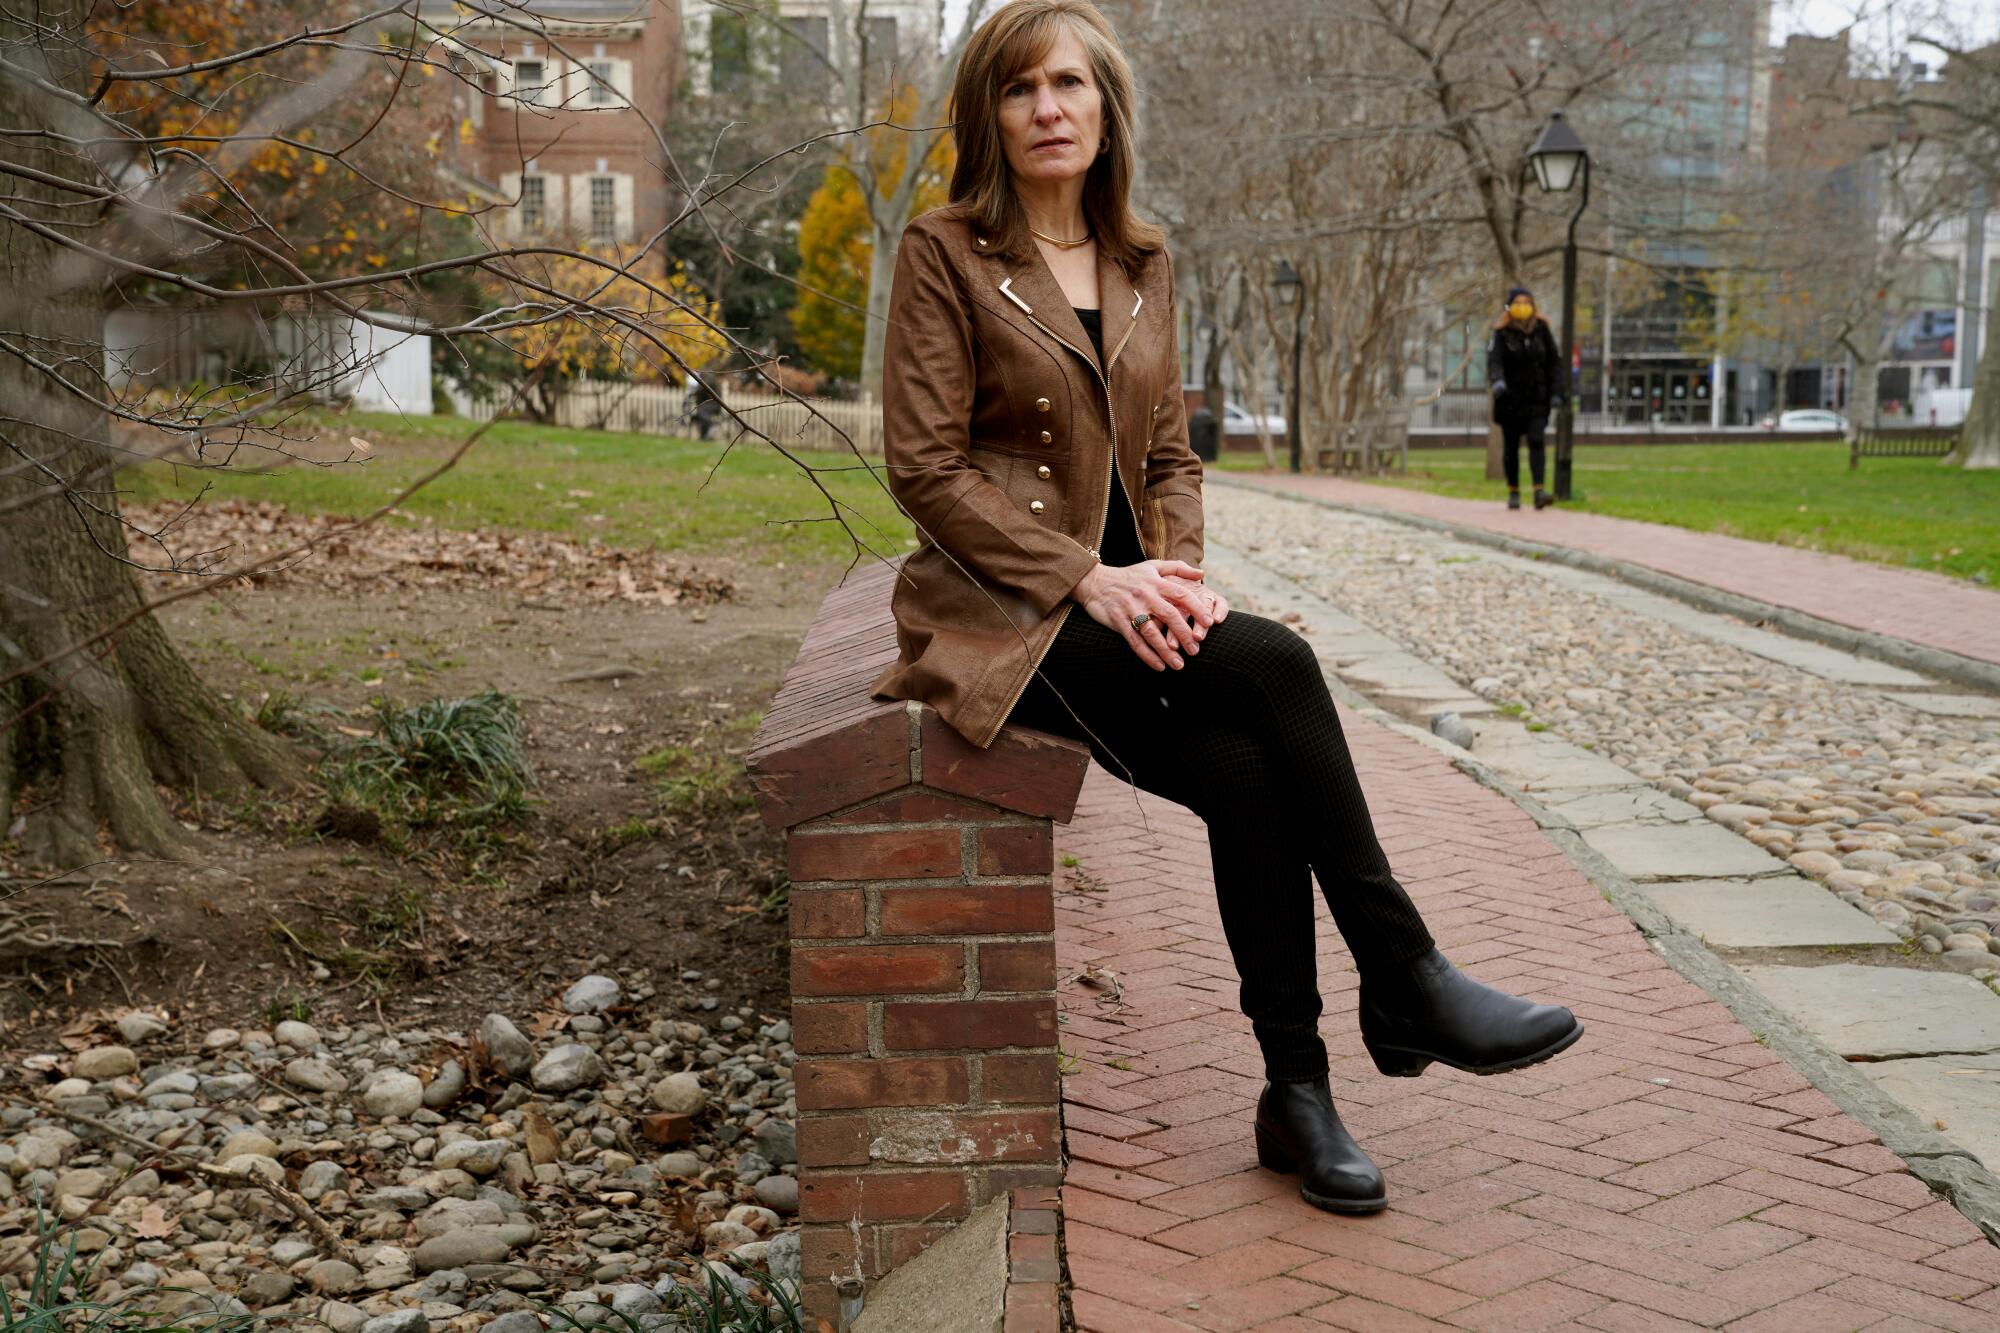 Margaret Cronan, former news director at CBS-owned station in Philadelphia, sits outdoors on a low brick wall.